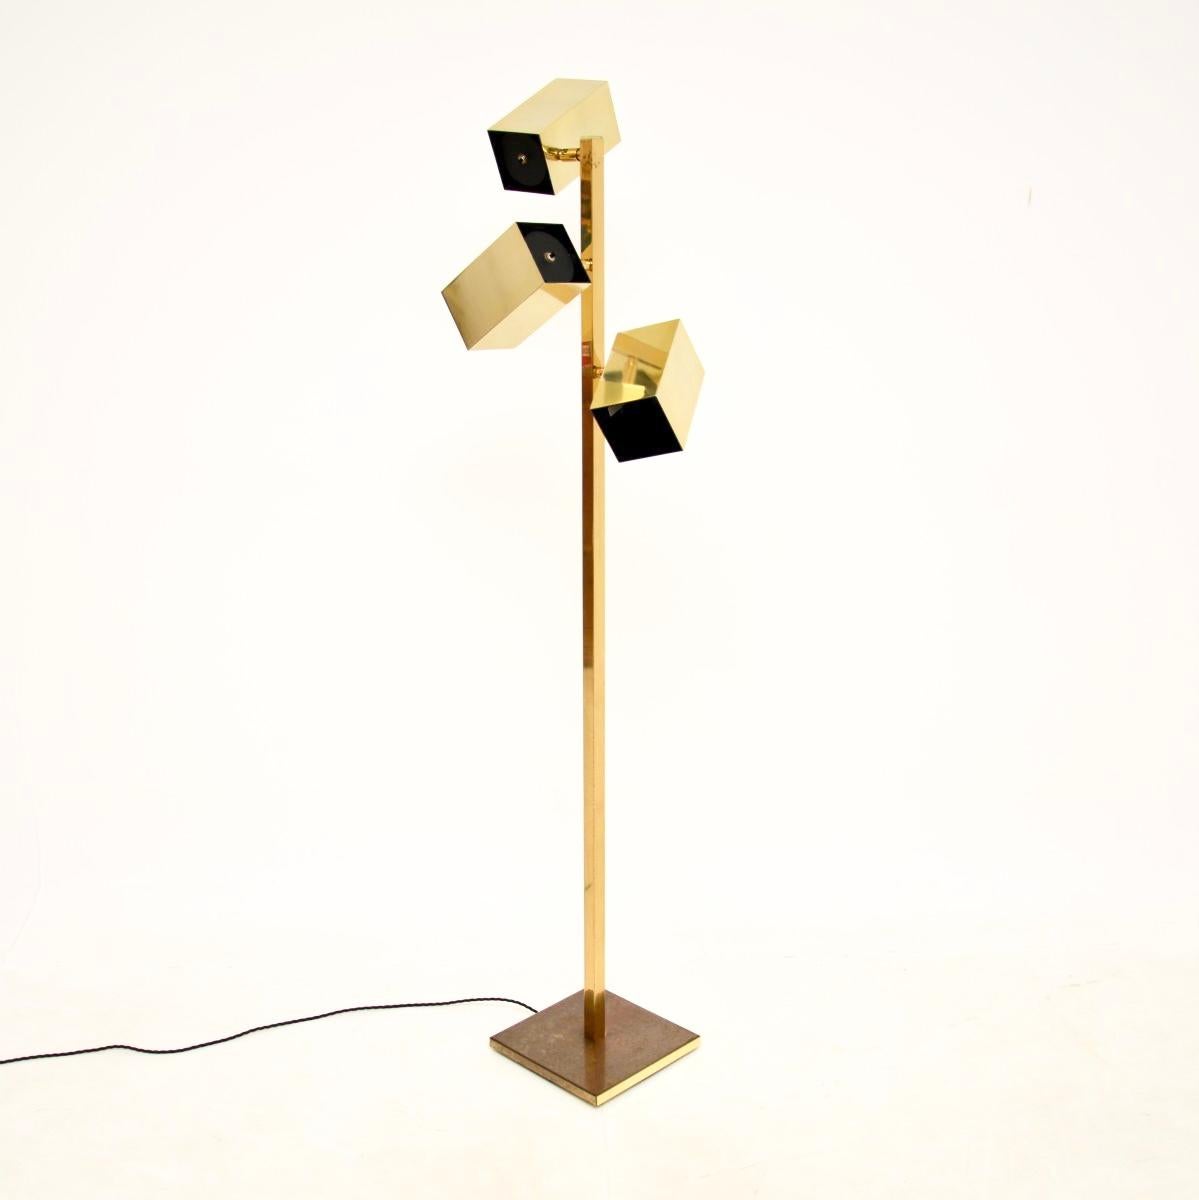 A stunning vintage brass floor lamp by Koch and Lowy. This was made in the USA, it dates from around the 1970’s.

It is of superb quality and has a fantastic design. The three cube shaped shades can swivel, tilt and rotate to aim the light in all